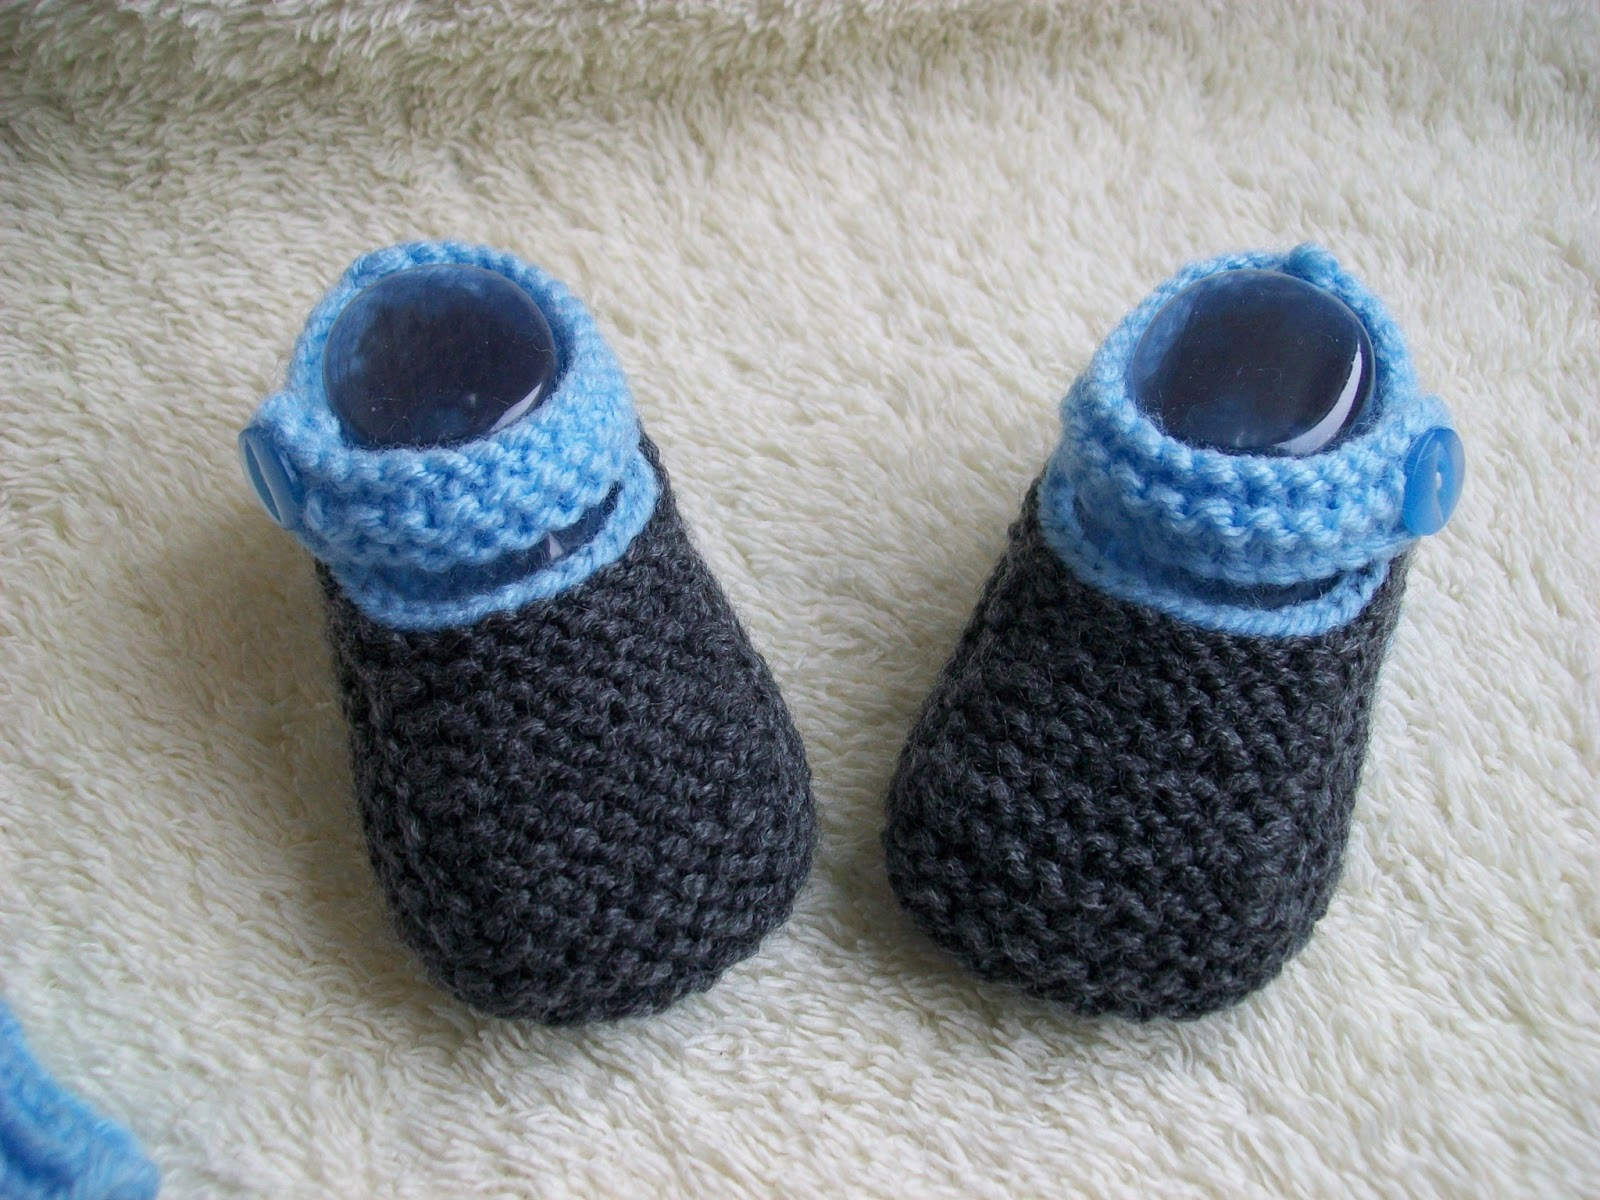 Basic Baby Booties Knitting Pattern 30 Free Patterns For Knitted Ba Booties Guide Patterns